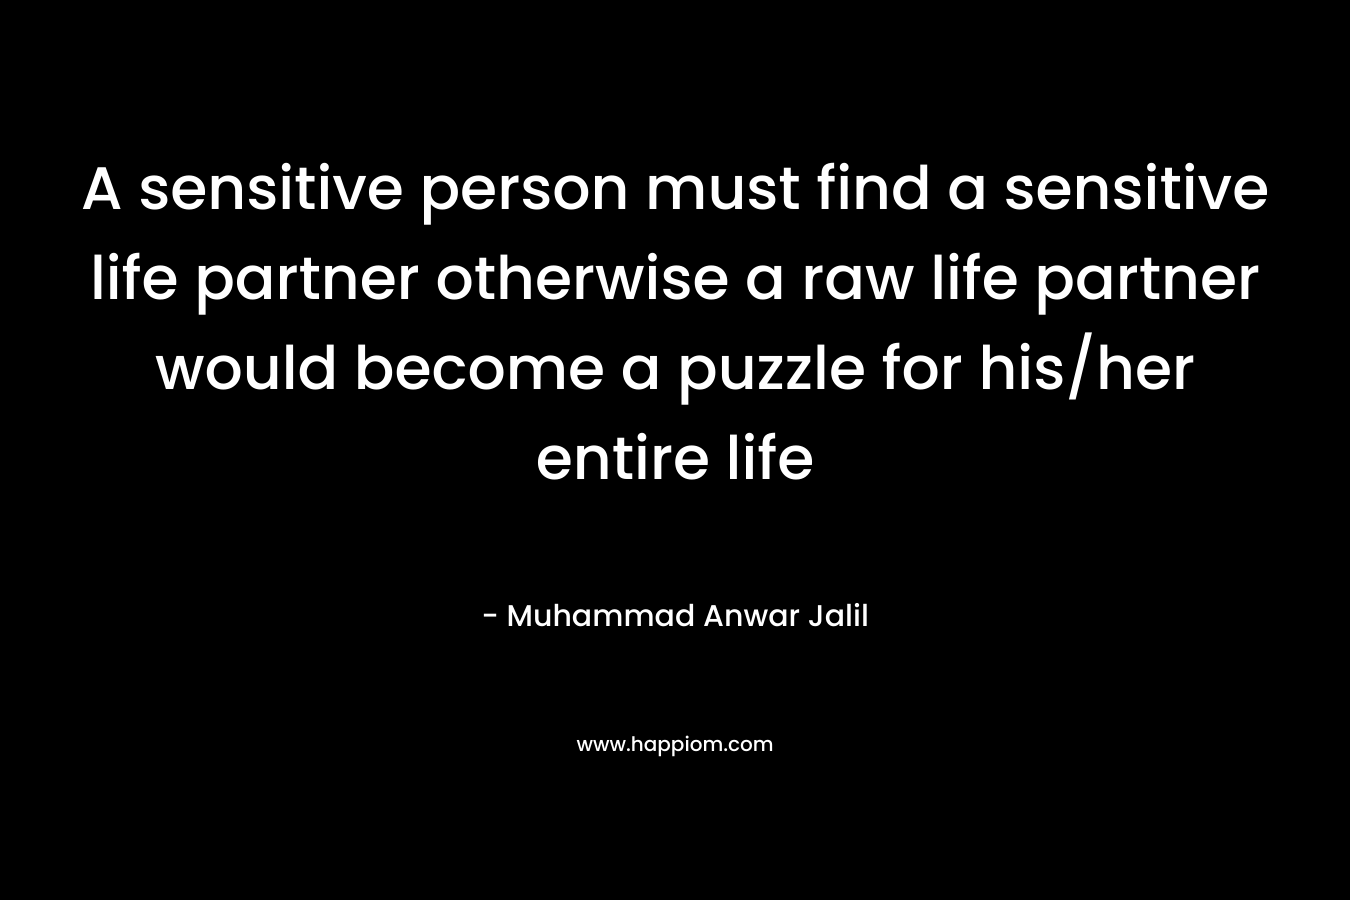 A sensitive person must find a sensitive life partner otherwise a raw life partner would become a puzzle for his/her entire life